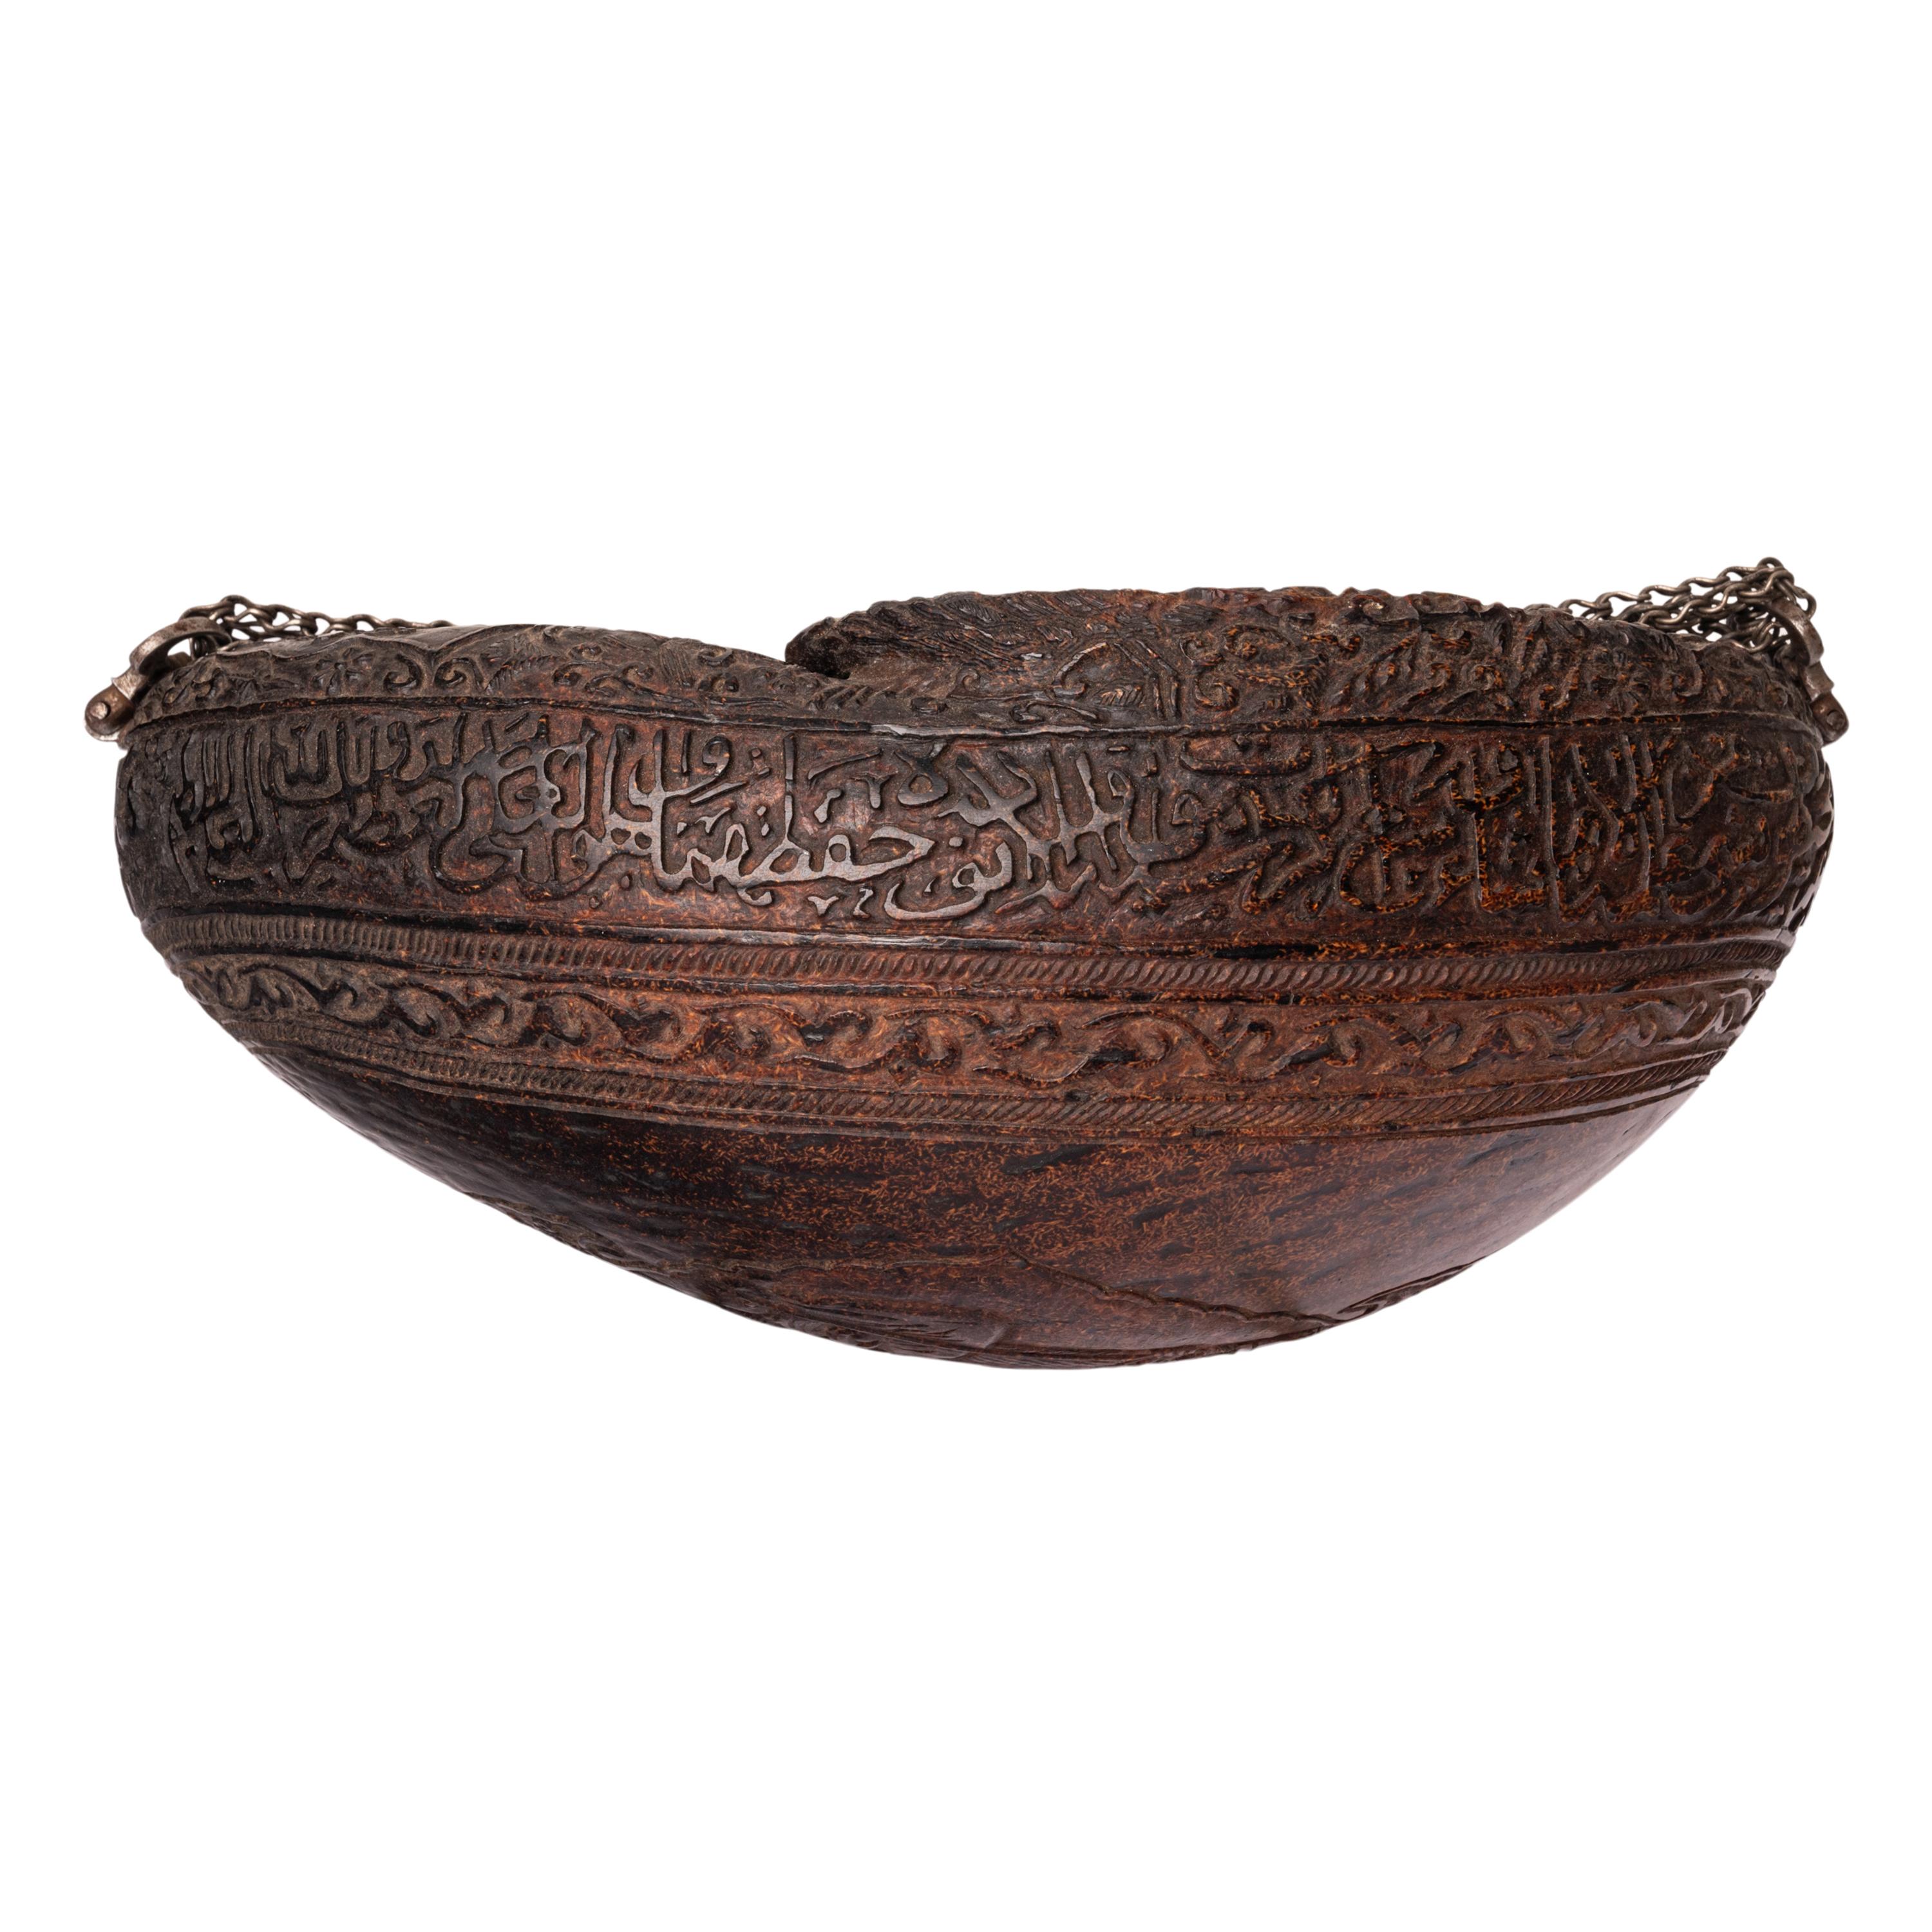 Rare antique Persian Islamic carved Kashkul (Sufi begging bowl) coco-de-mer, Safavid period, Persia, circa 1740.
This fine & rare kashkul is carved from the fruit of the palm tree 